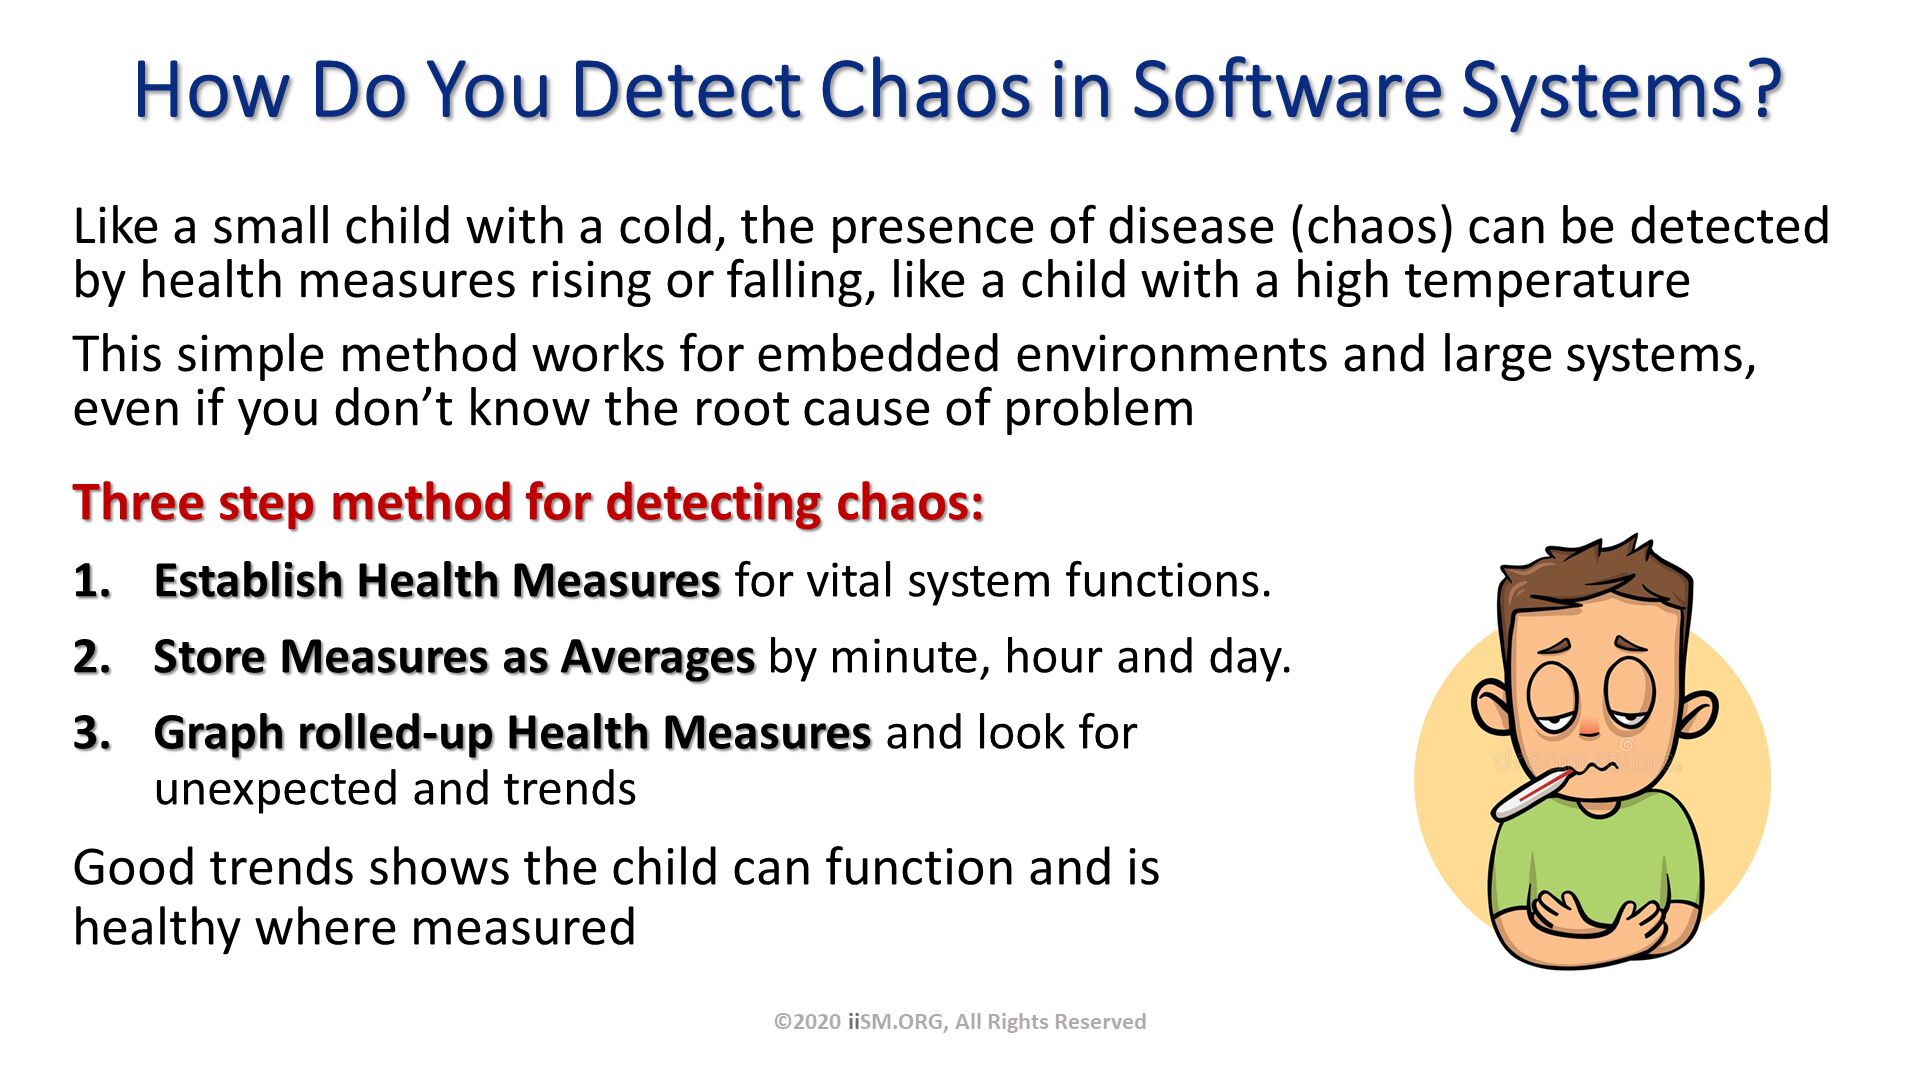 How Do You Detect Chaos in Software Systems?. Three step method for detecting chaos:
Establish Health Measures for vital system functions.  
Store Measures as Averages by minute, hour and day.  
Graph rolled-up Health Measures and look for unexpected and trends
Good trends shows the child can function and is healthy where measured . ©2020 iiSM.ORG, All Rights Reserved. Like a small child with a cold, the presence of disease (chaos) can be detected by health measures rising or falling, like a child with a high temperature
This simple method works for embedded environments and large systems, even if you don’t know the root cause of problem. 